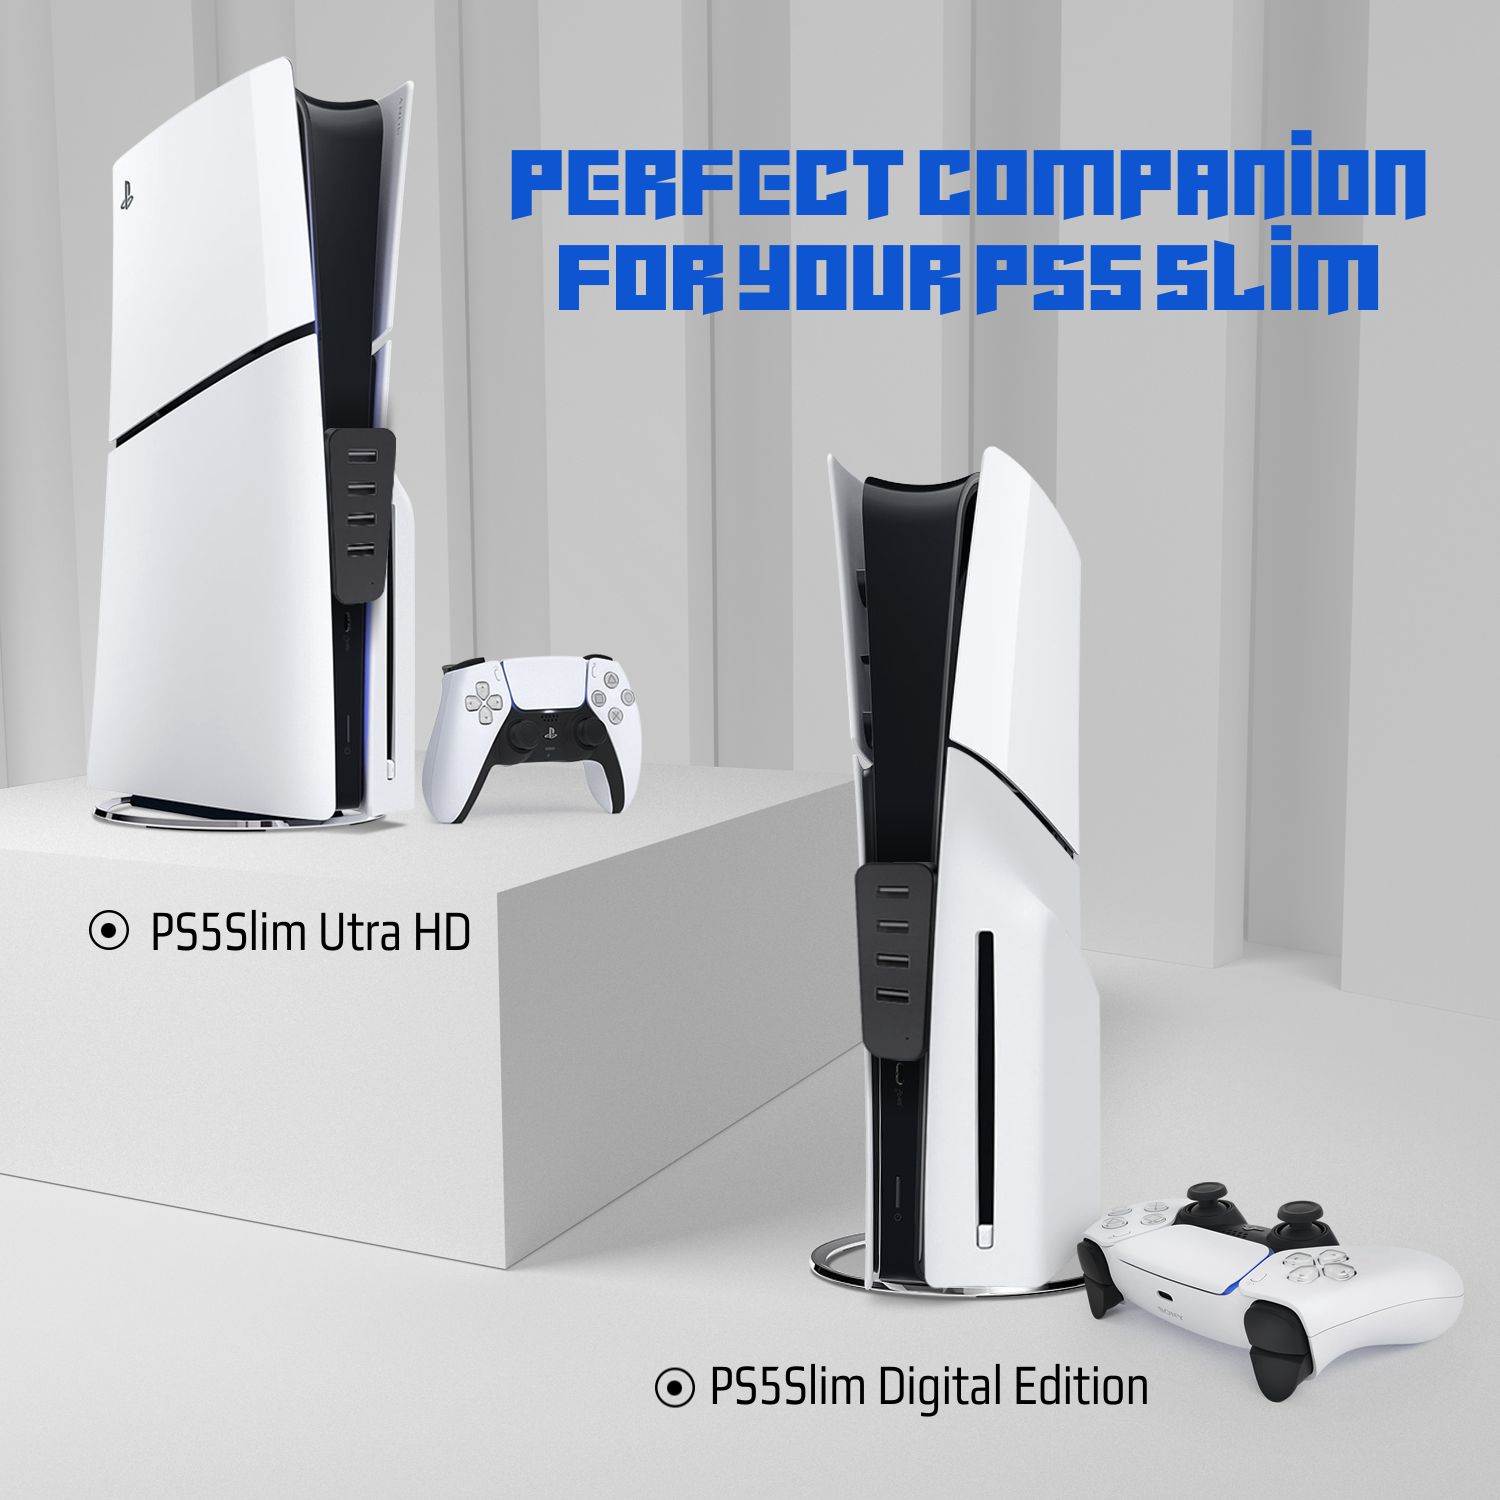 Stylish Design: This USB port for PS5 console slim with its a simple and elegant design that matches the style of the console, making it the perfect gift for PS5 owners that will add beauty & versatility to the console